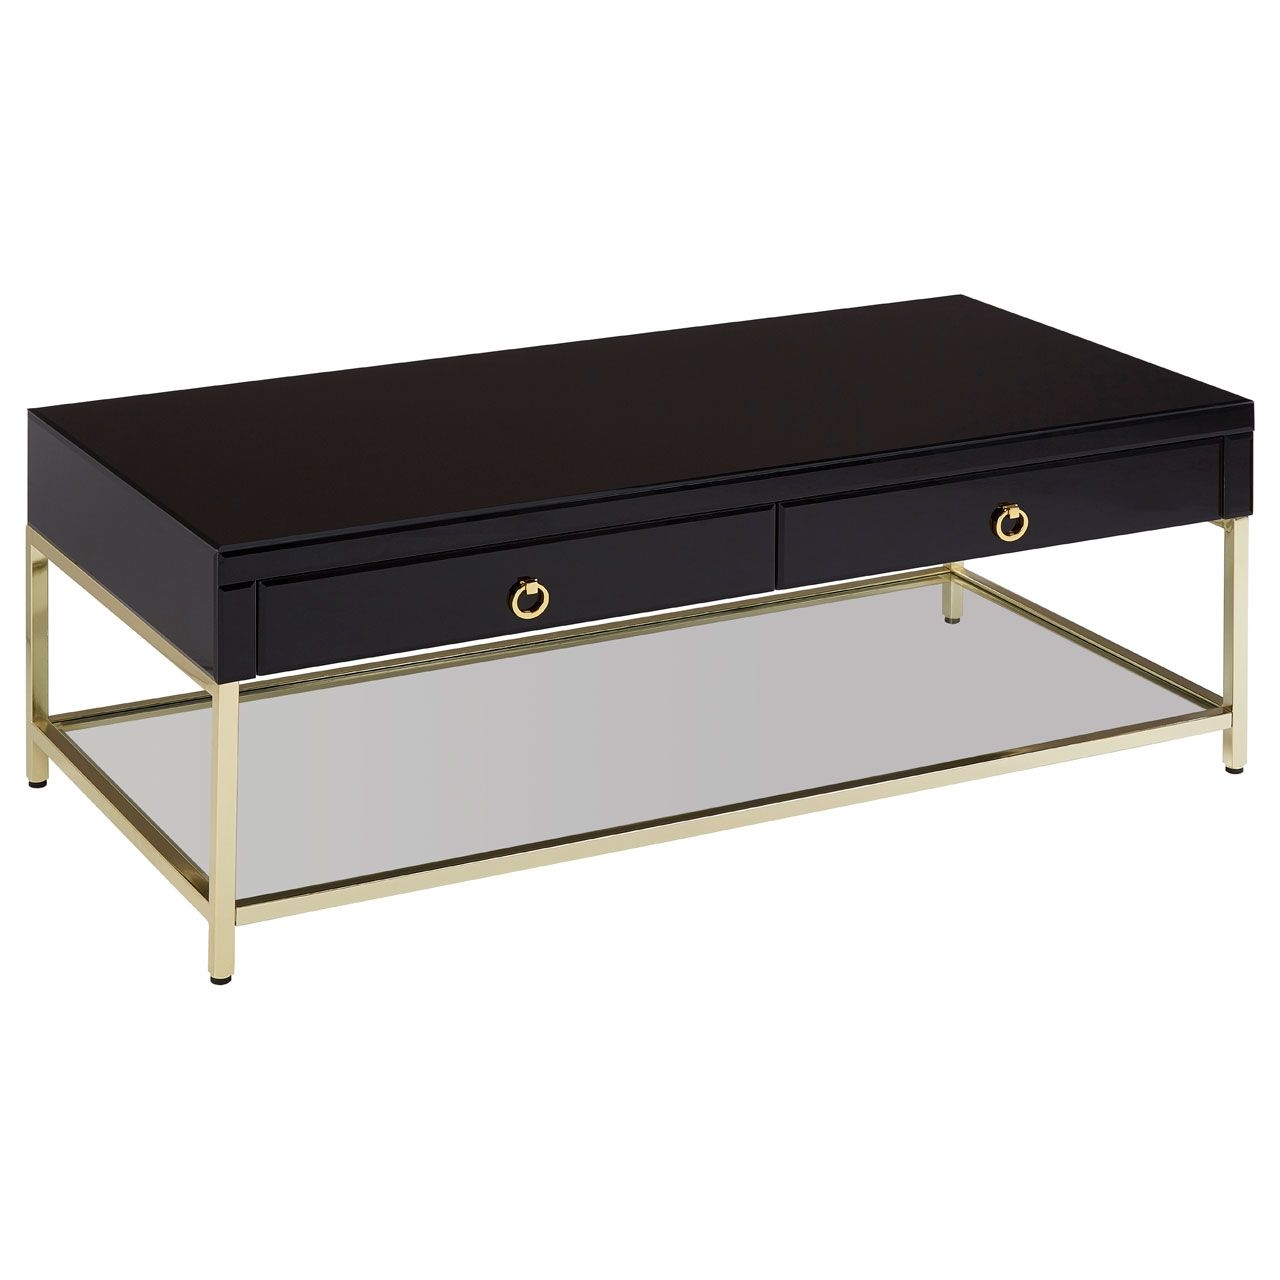 Kensington Townhouse Wooden Coffee Table In Black With 2 Drawers